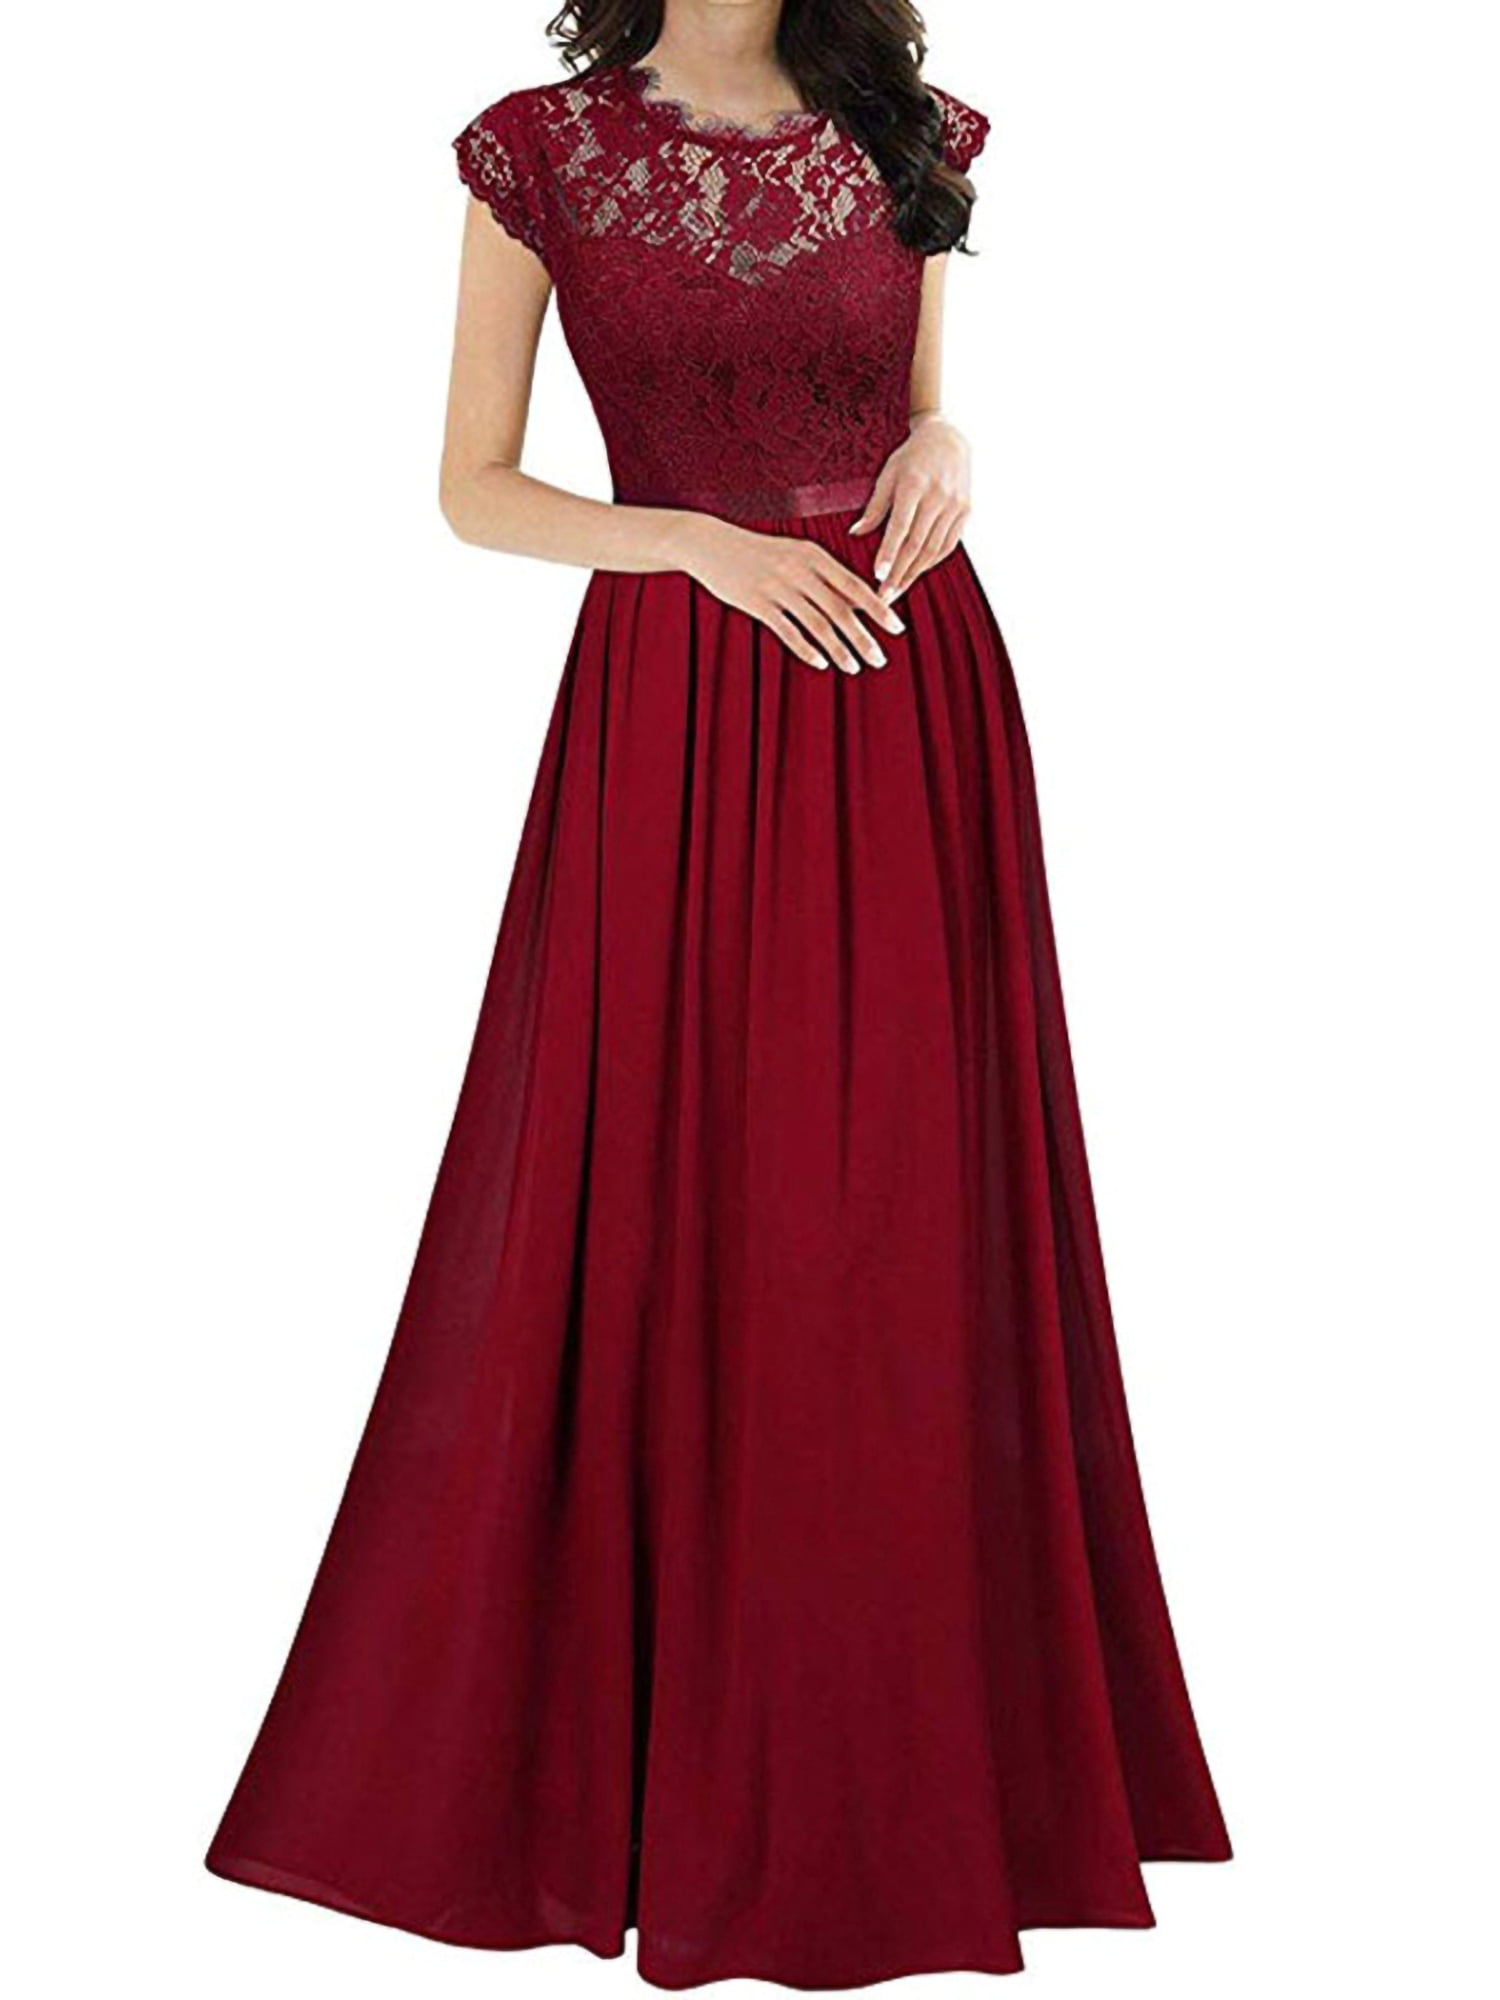 UK Womens Bridesmaid Long Maxi Formal Dress Evening Prom Ball Gown Wedding Party